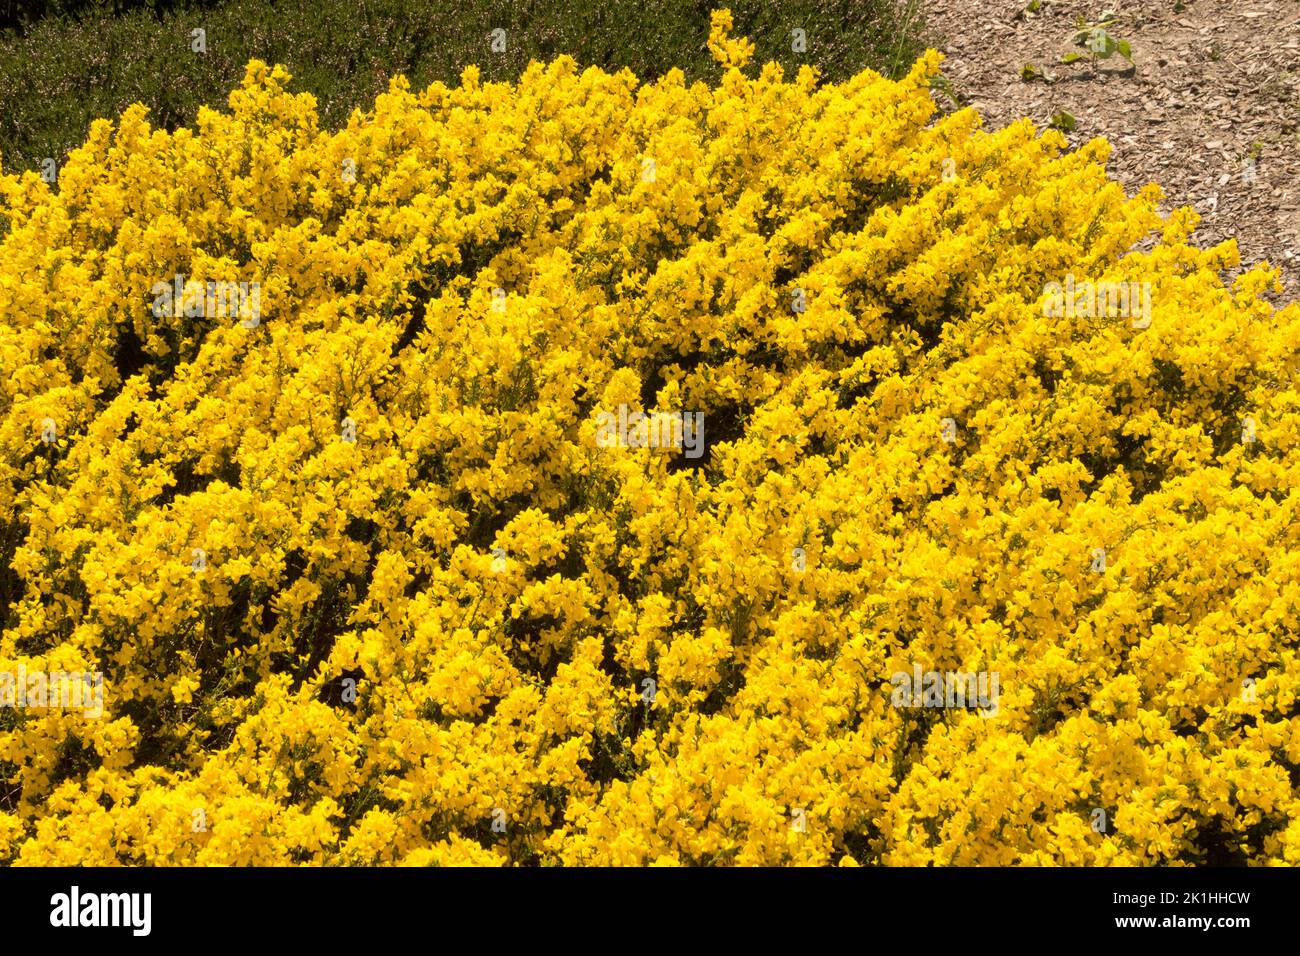 Yellow, Ground Cover Plant, Cytisus decumbens Prostrate Broom Ground Cover Plant Stock Photo